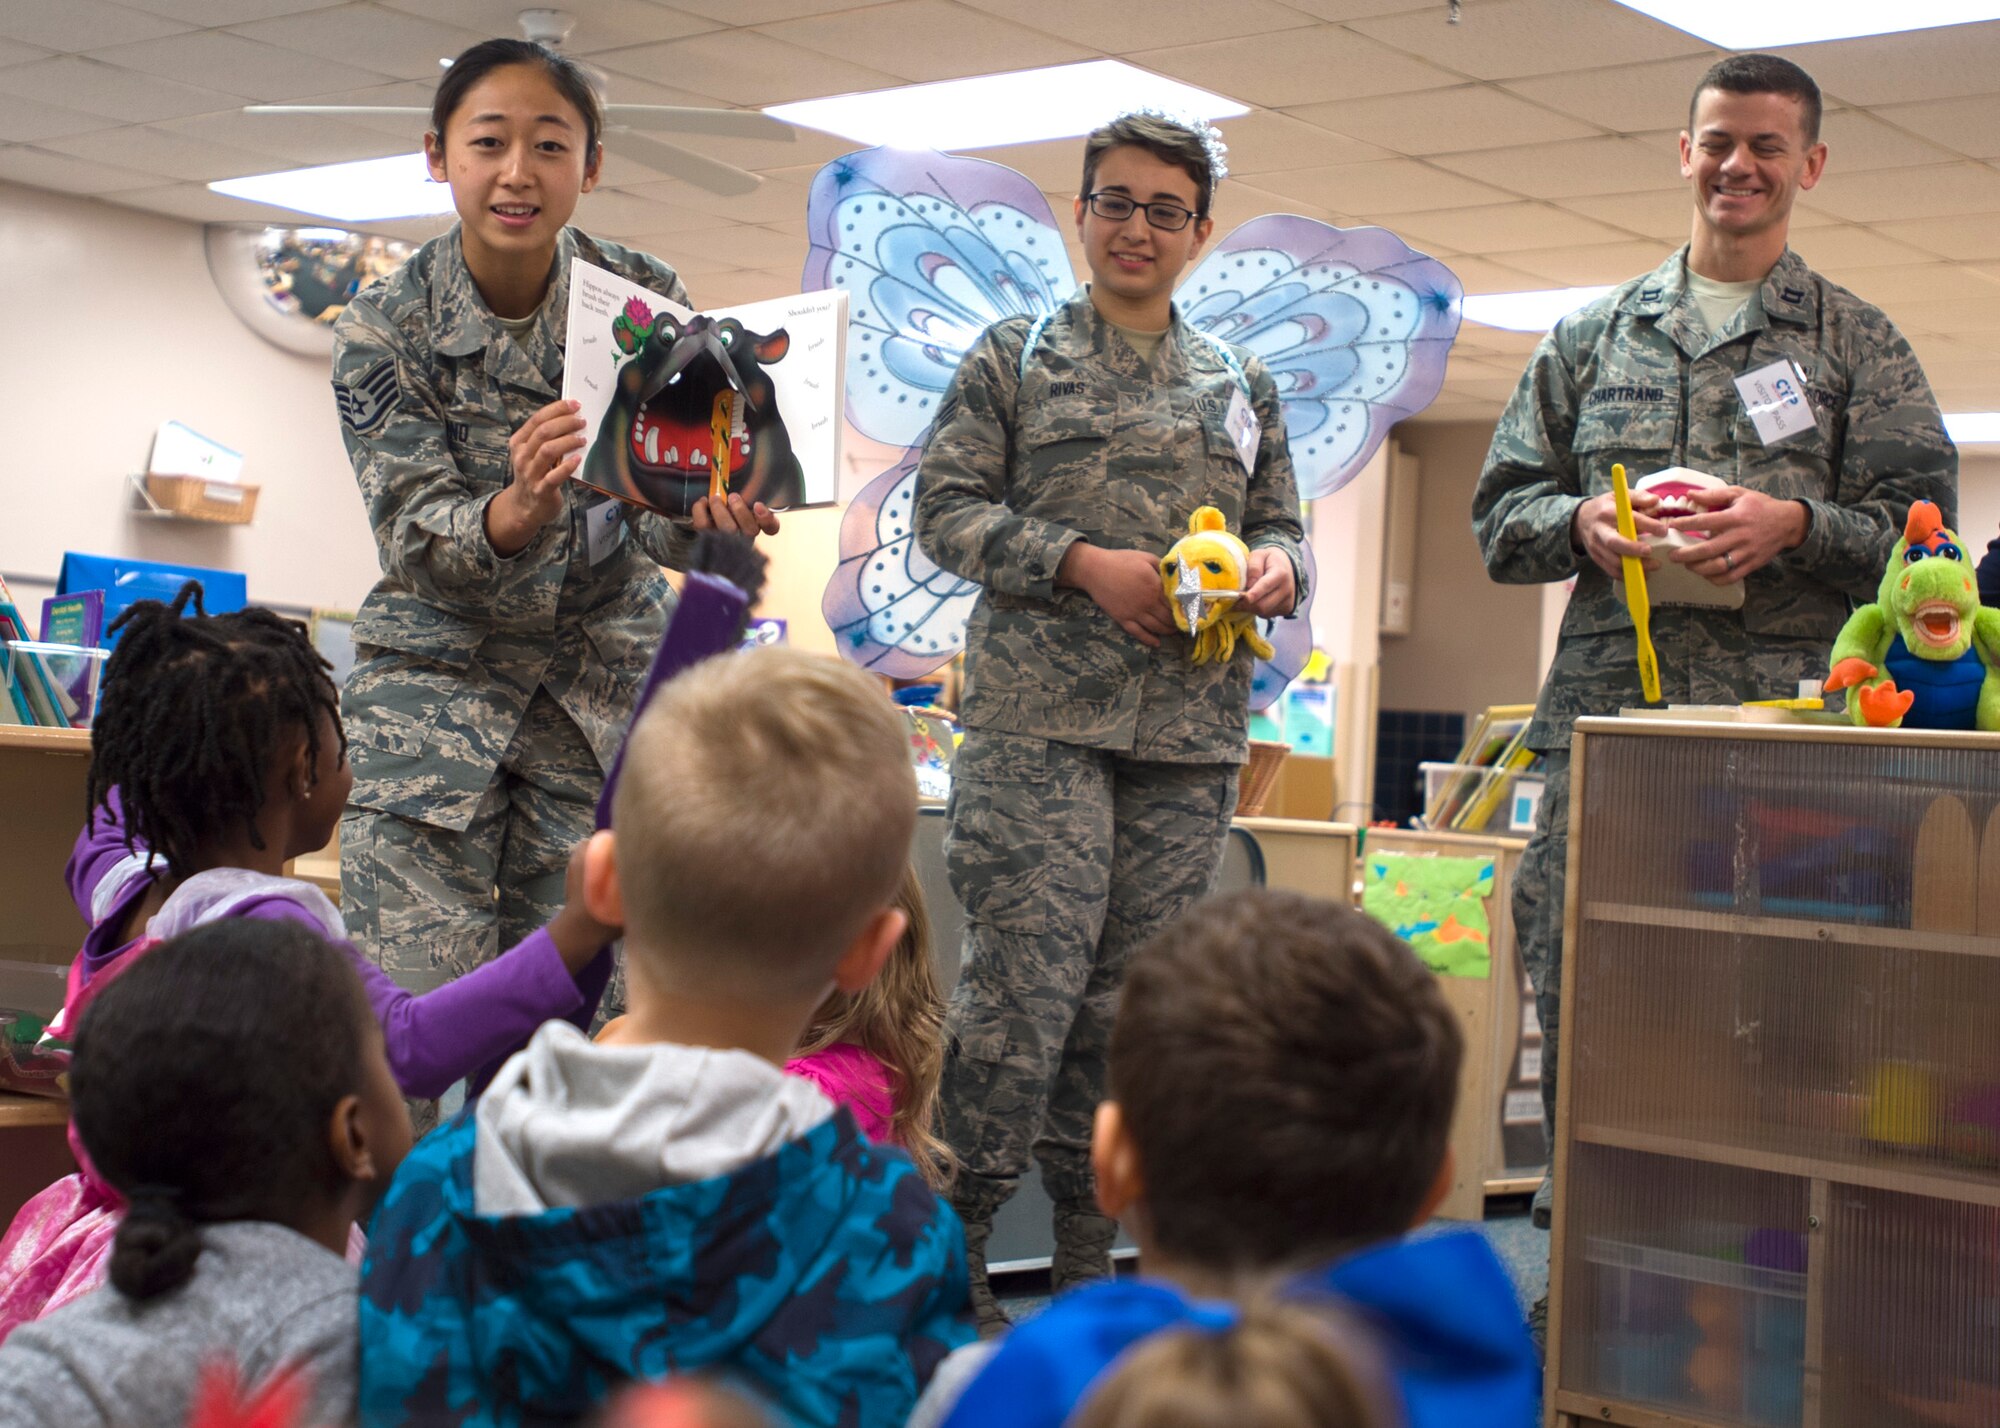 From left, Staff Sgt. Soohwa Ono, Senior Airman Vanessa Rivas, and Capt. Daniel Chartrand promote pediatric oral hygiene Feb. 2 at the Kelly Child Development Center. Throughout February, the 59th Dental Group is holding outreach events at the Joint Base San Antonio-Lackland Elementary School and child development centers. Ono and Rivas are 59th DG dental technicians; Chartrand is a 59th DG dentist. (U.S. Air Force photo/Staff Sgt. Kevin Iinuma)